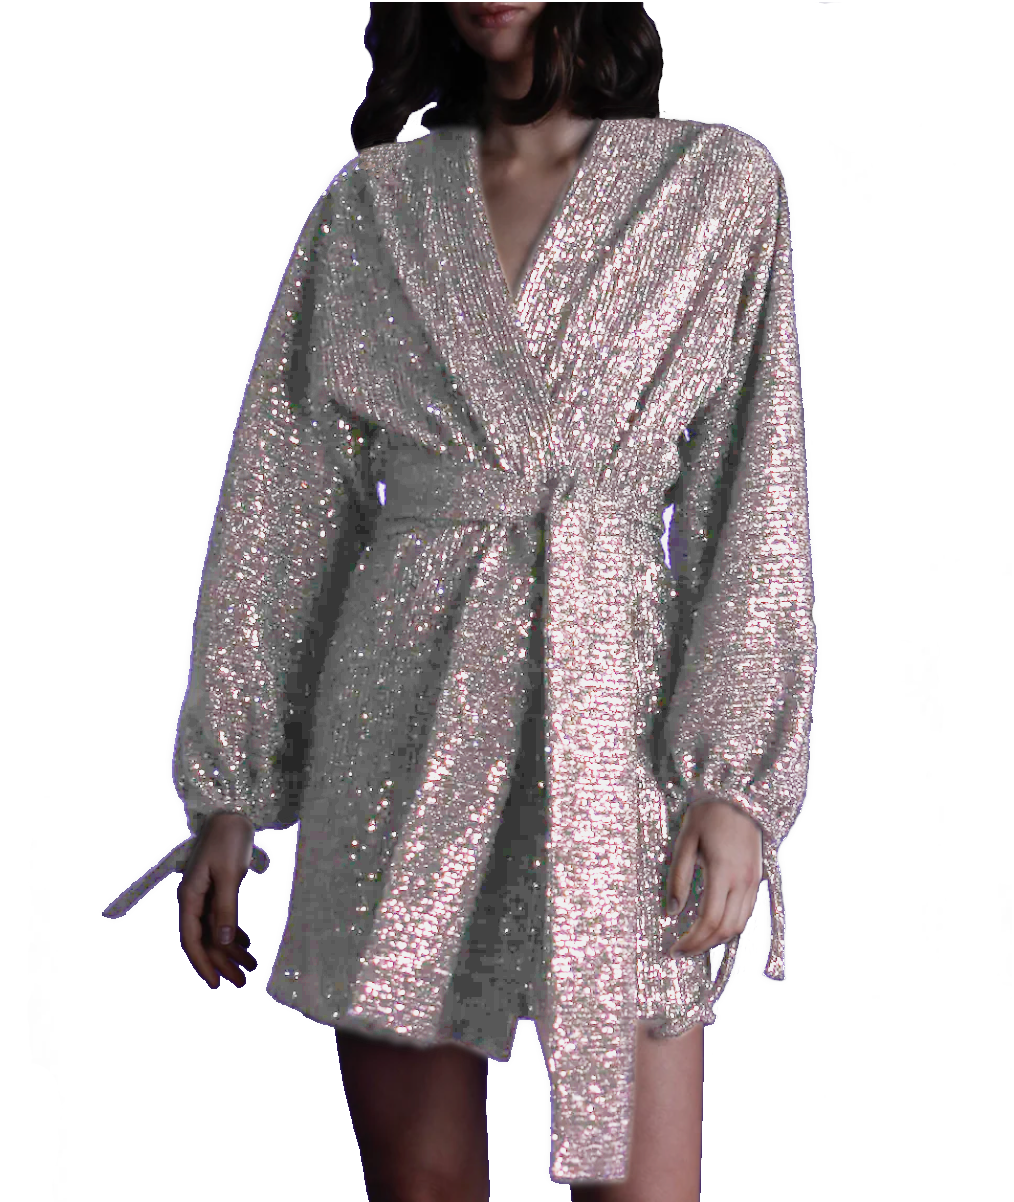 ELVIRA - short dress with wide sleeve and sash in silver sequin